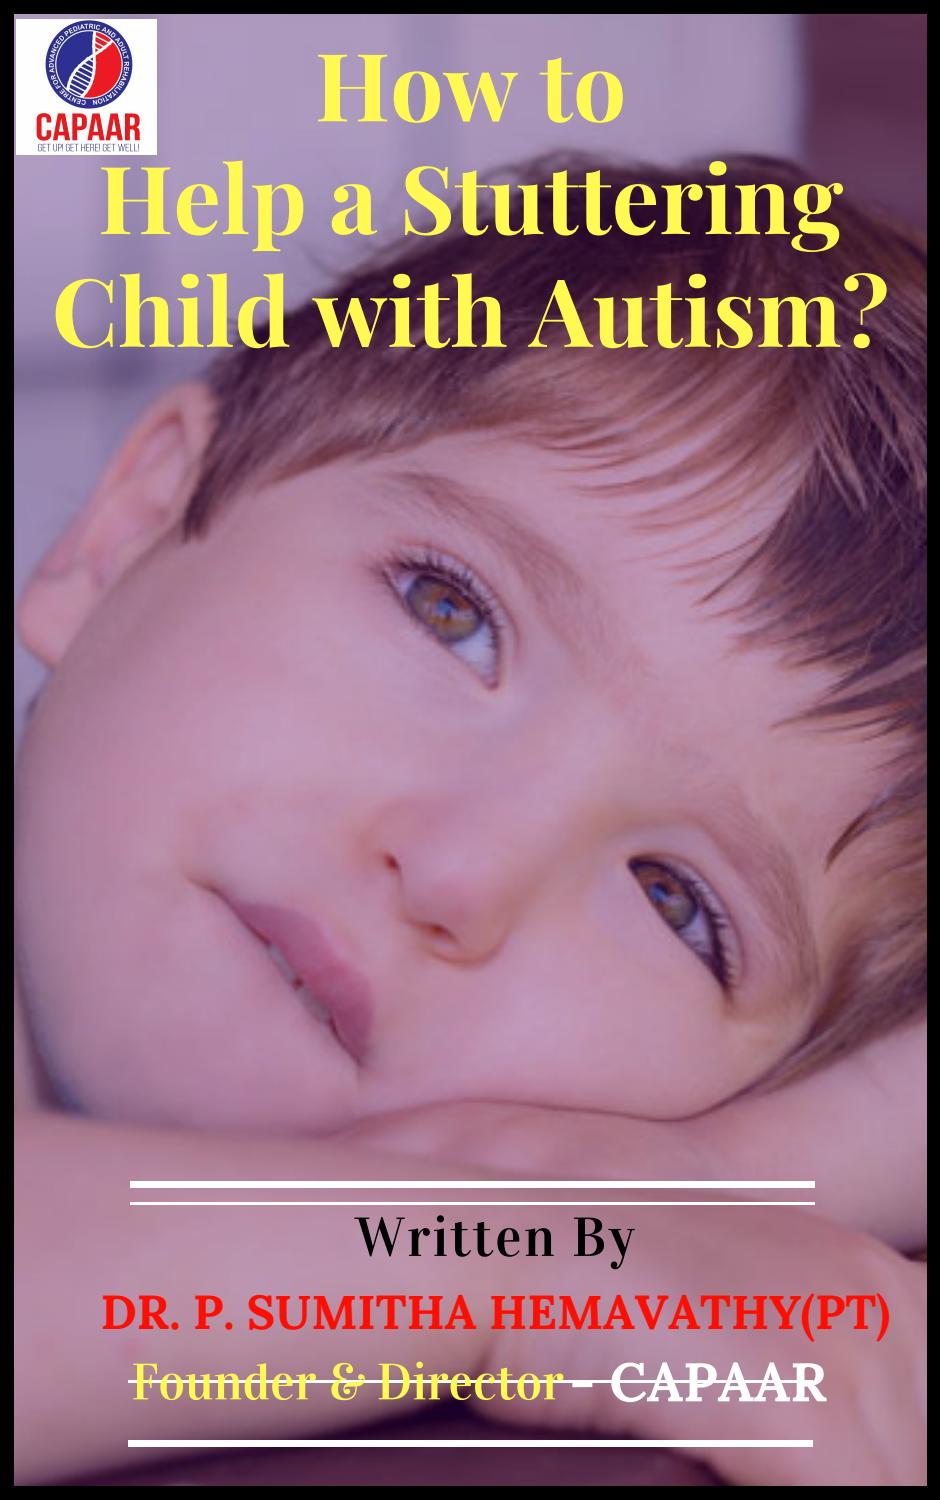 How to Help a Stuttering Child with Autism?